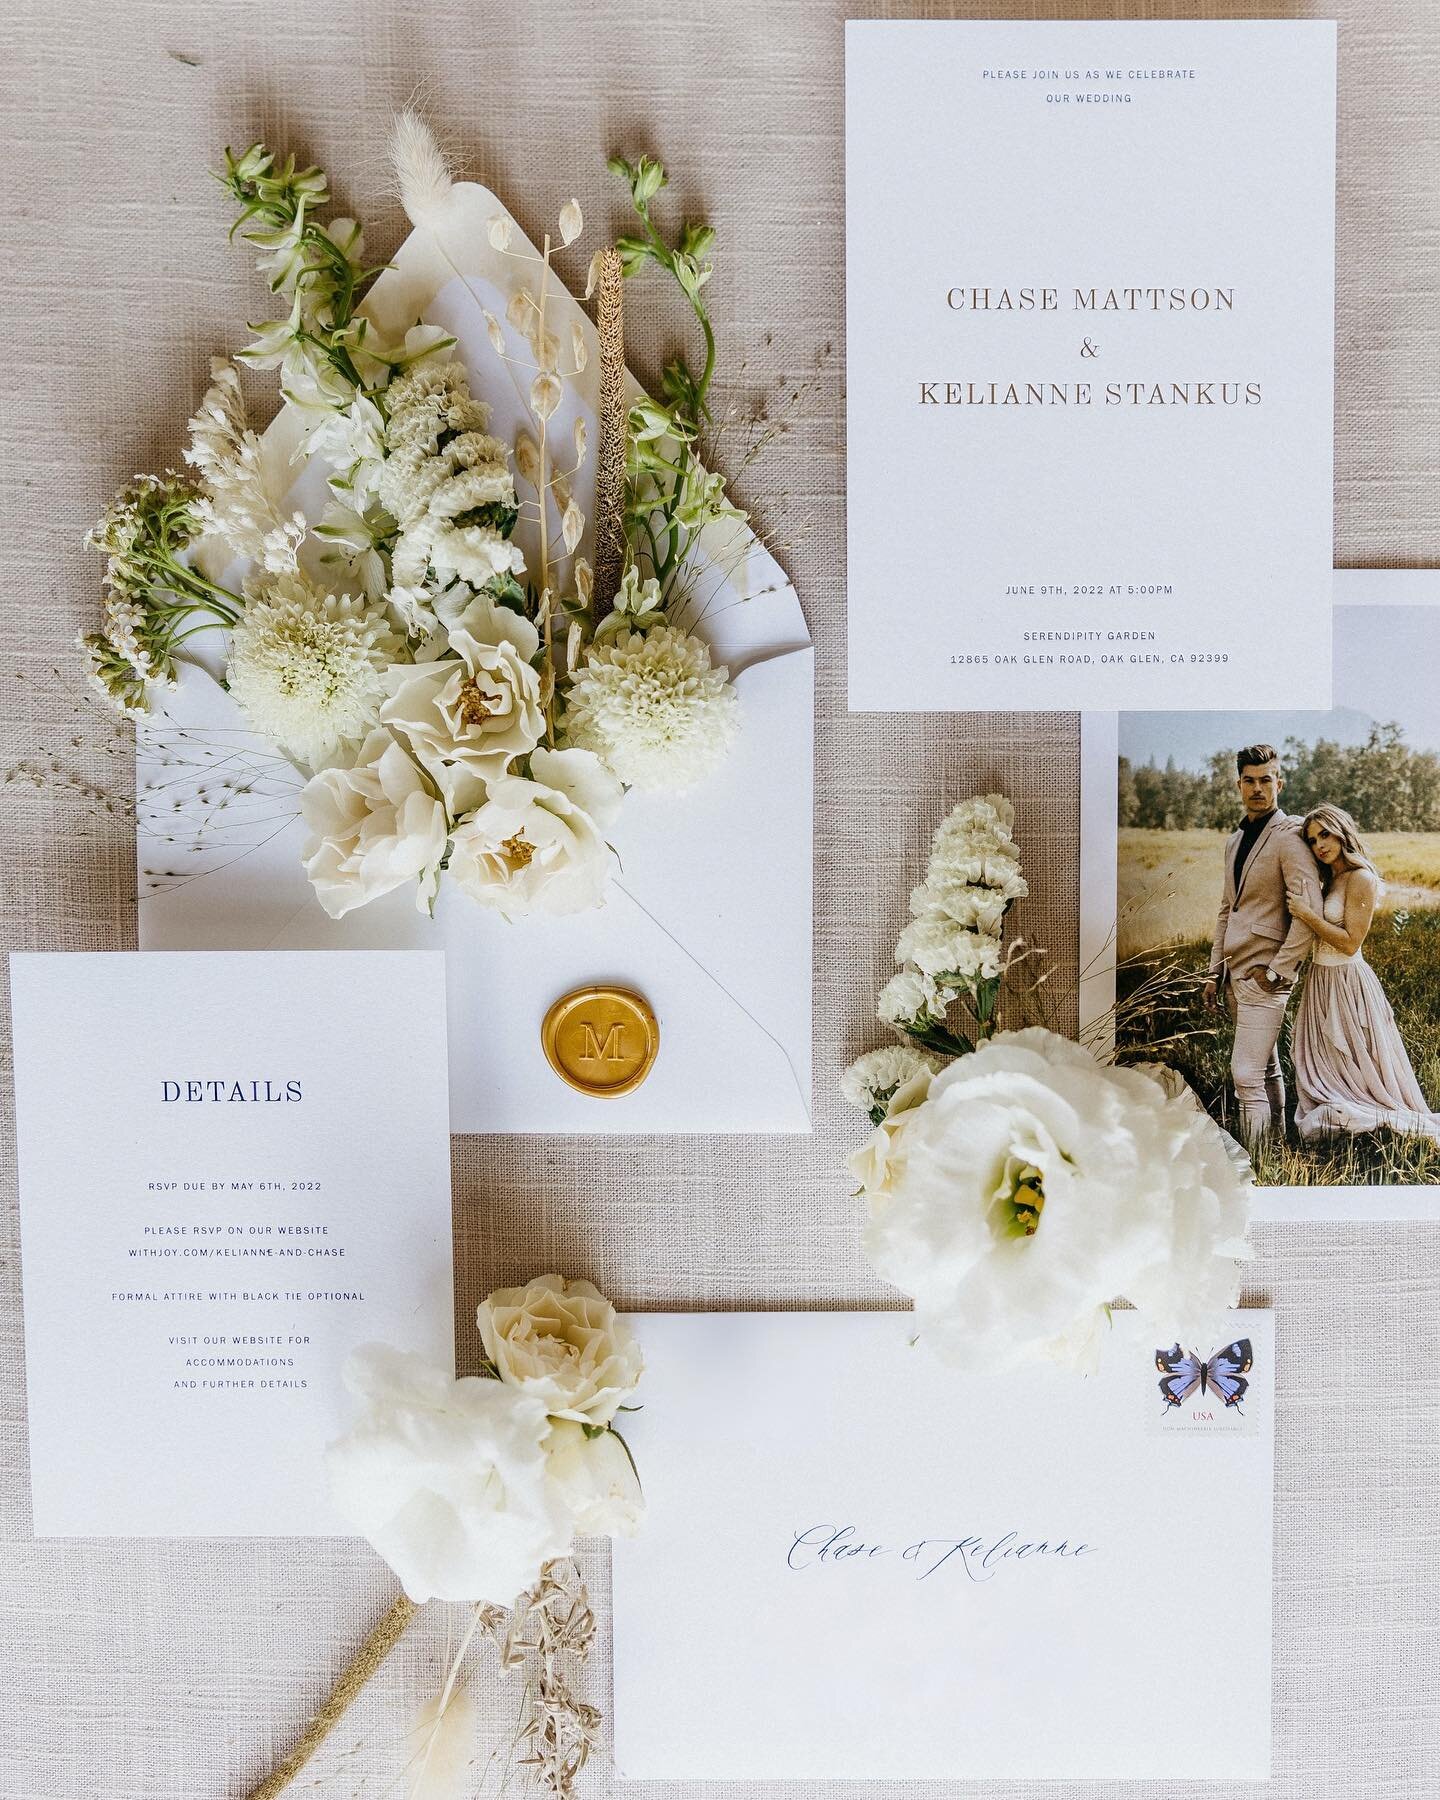 So. Many. Details in this photo and we're here for it. A little sunshine for your day. 💌

Planning | Event Styling: @livelovecreate, @christineschang
Venue: @serendipity_weddings
Photographer: @madisonemilyharephoto
Invitations/Stationary: @paperand